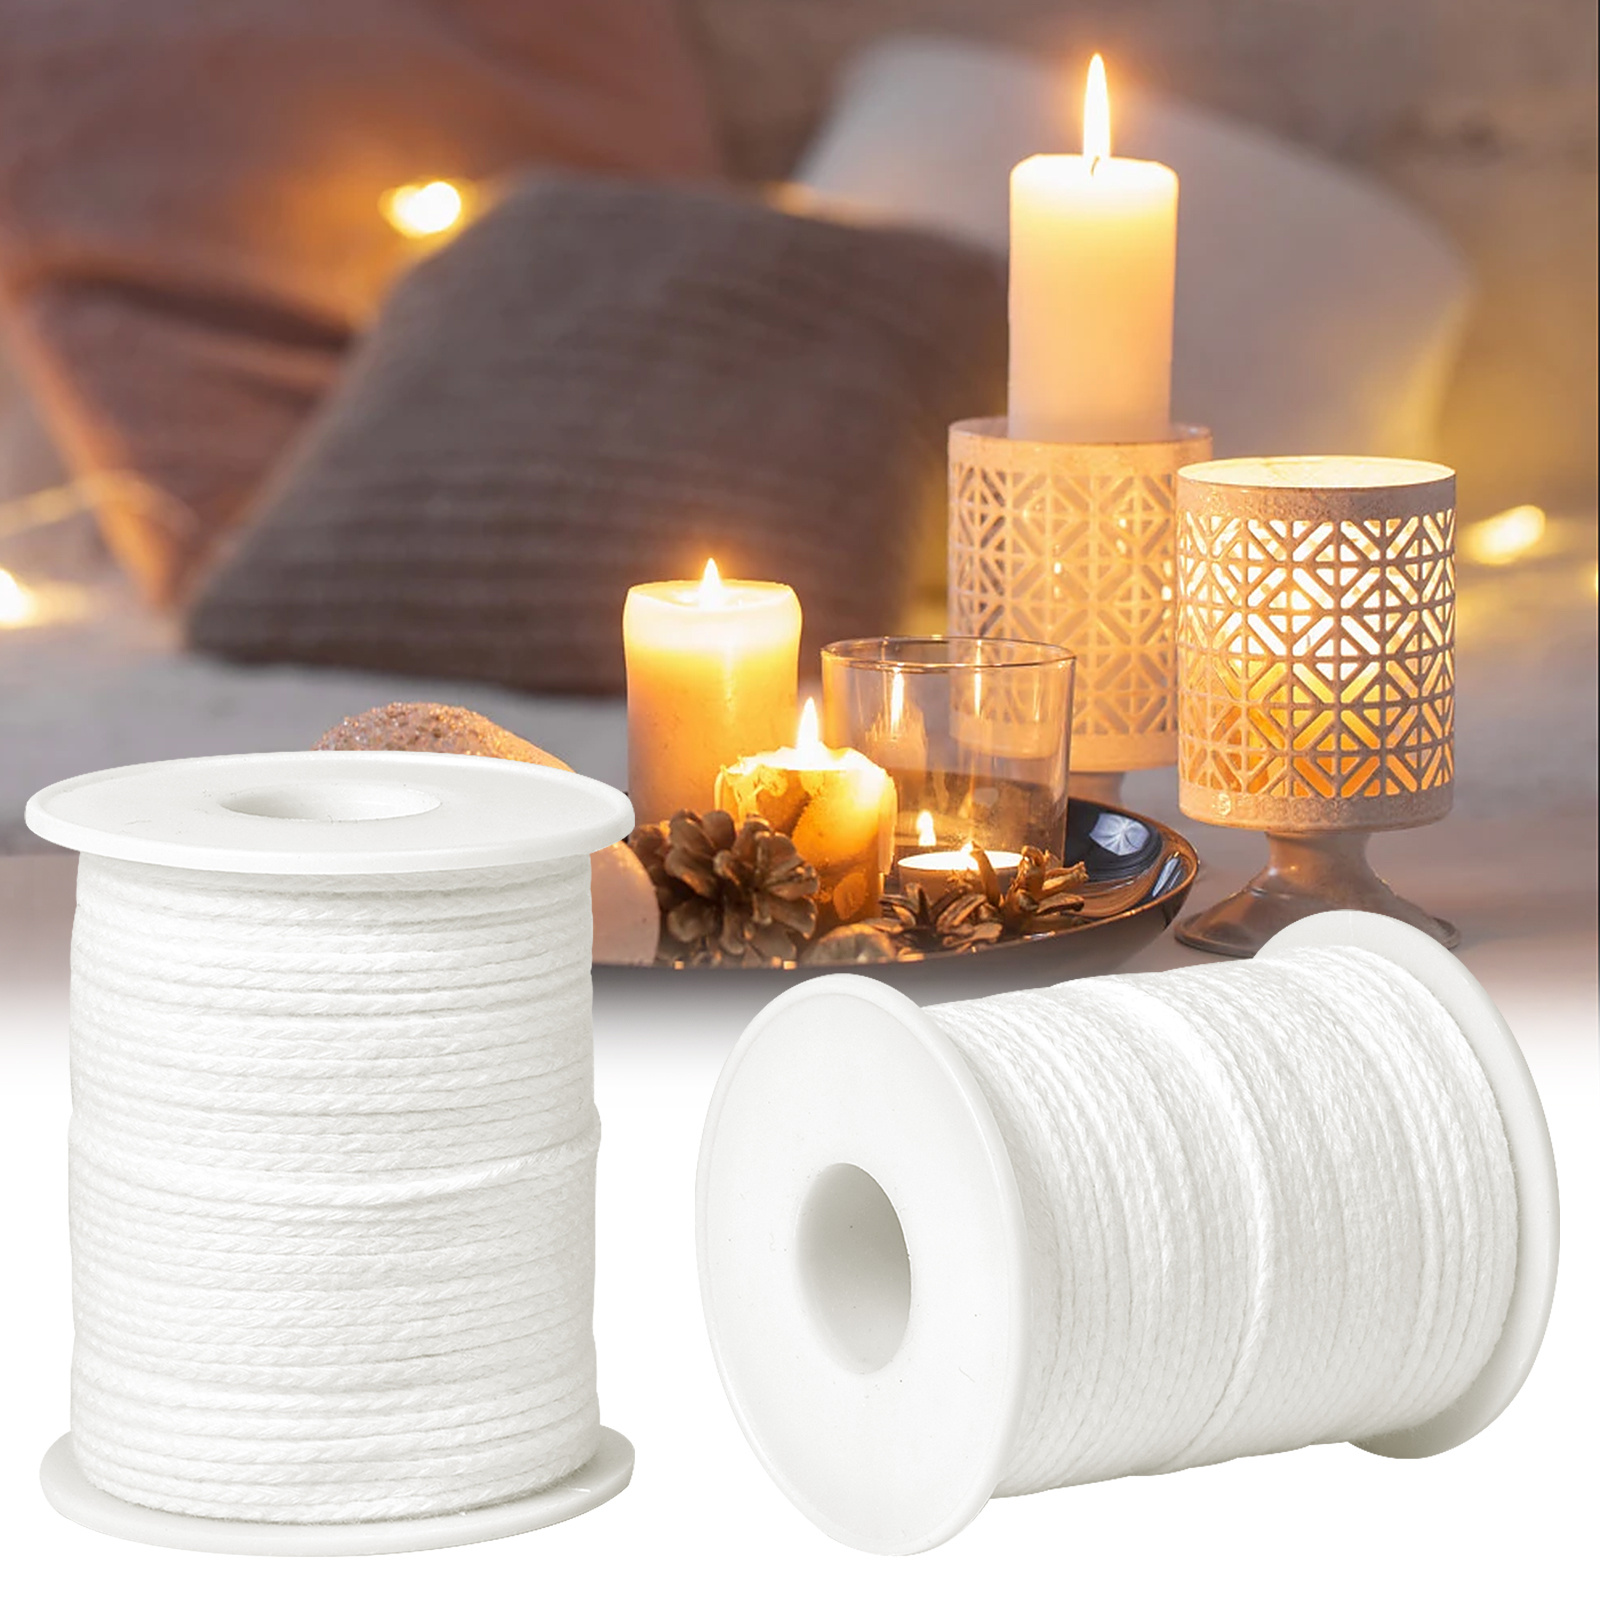 3 Roll Candle Wicks, 7204.72 Inch Wax Wick, Lamp Wick, Candle Wick Rope,  Cotton Candle Wicks Roll, Handmade Candle Supplies, Smokeless Cotton Candle  W